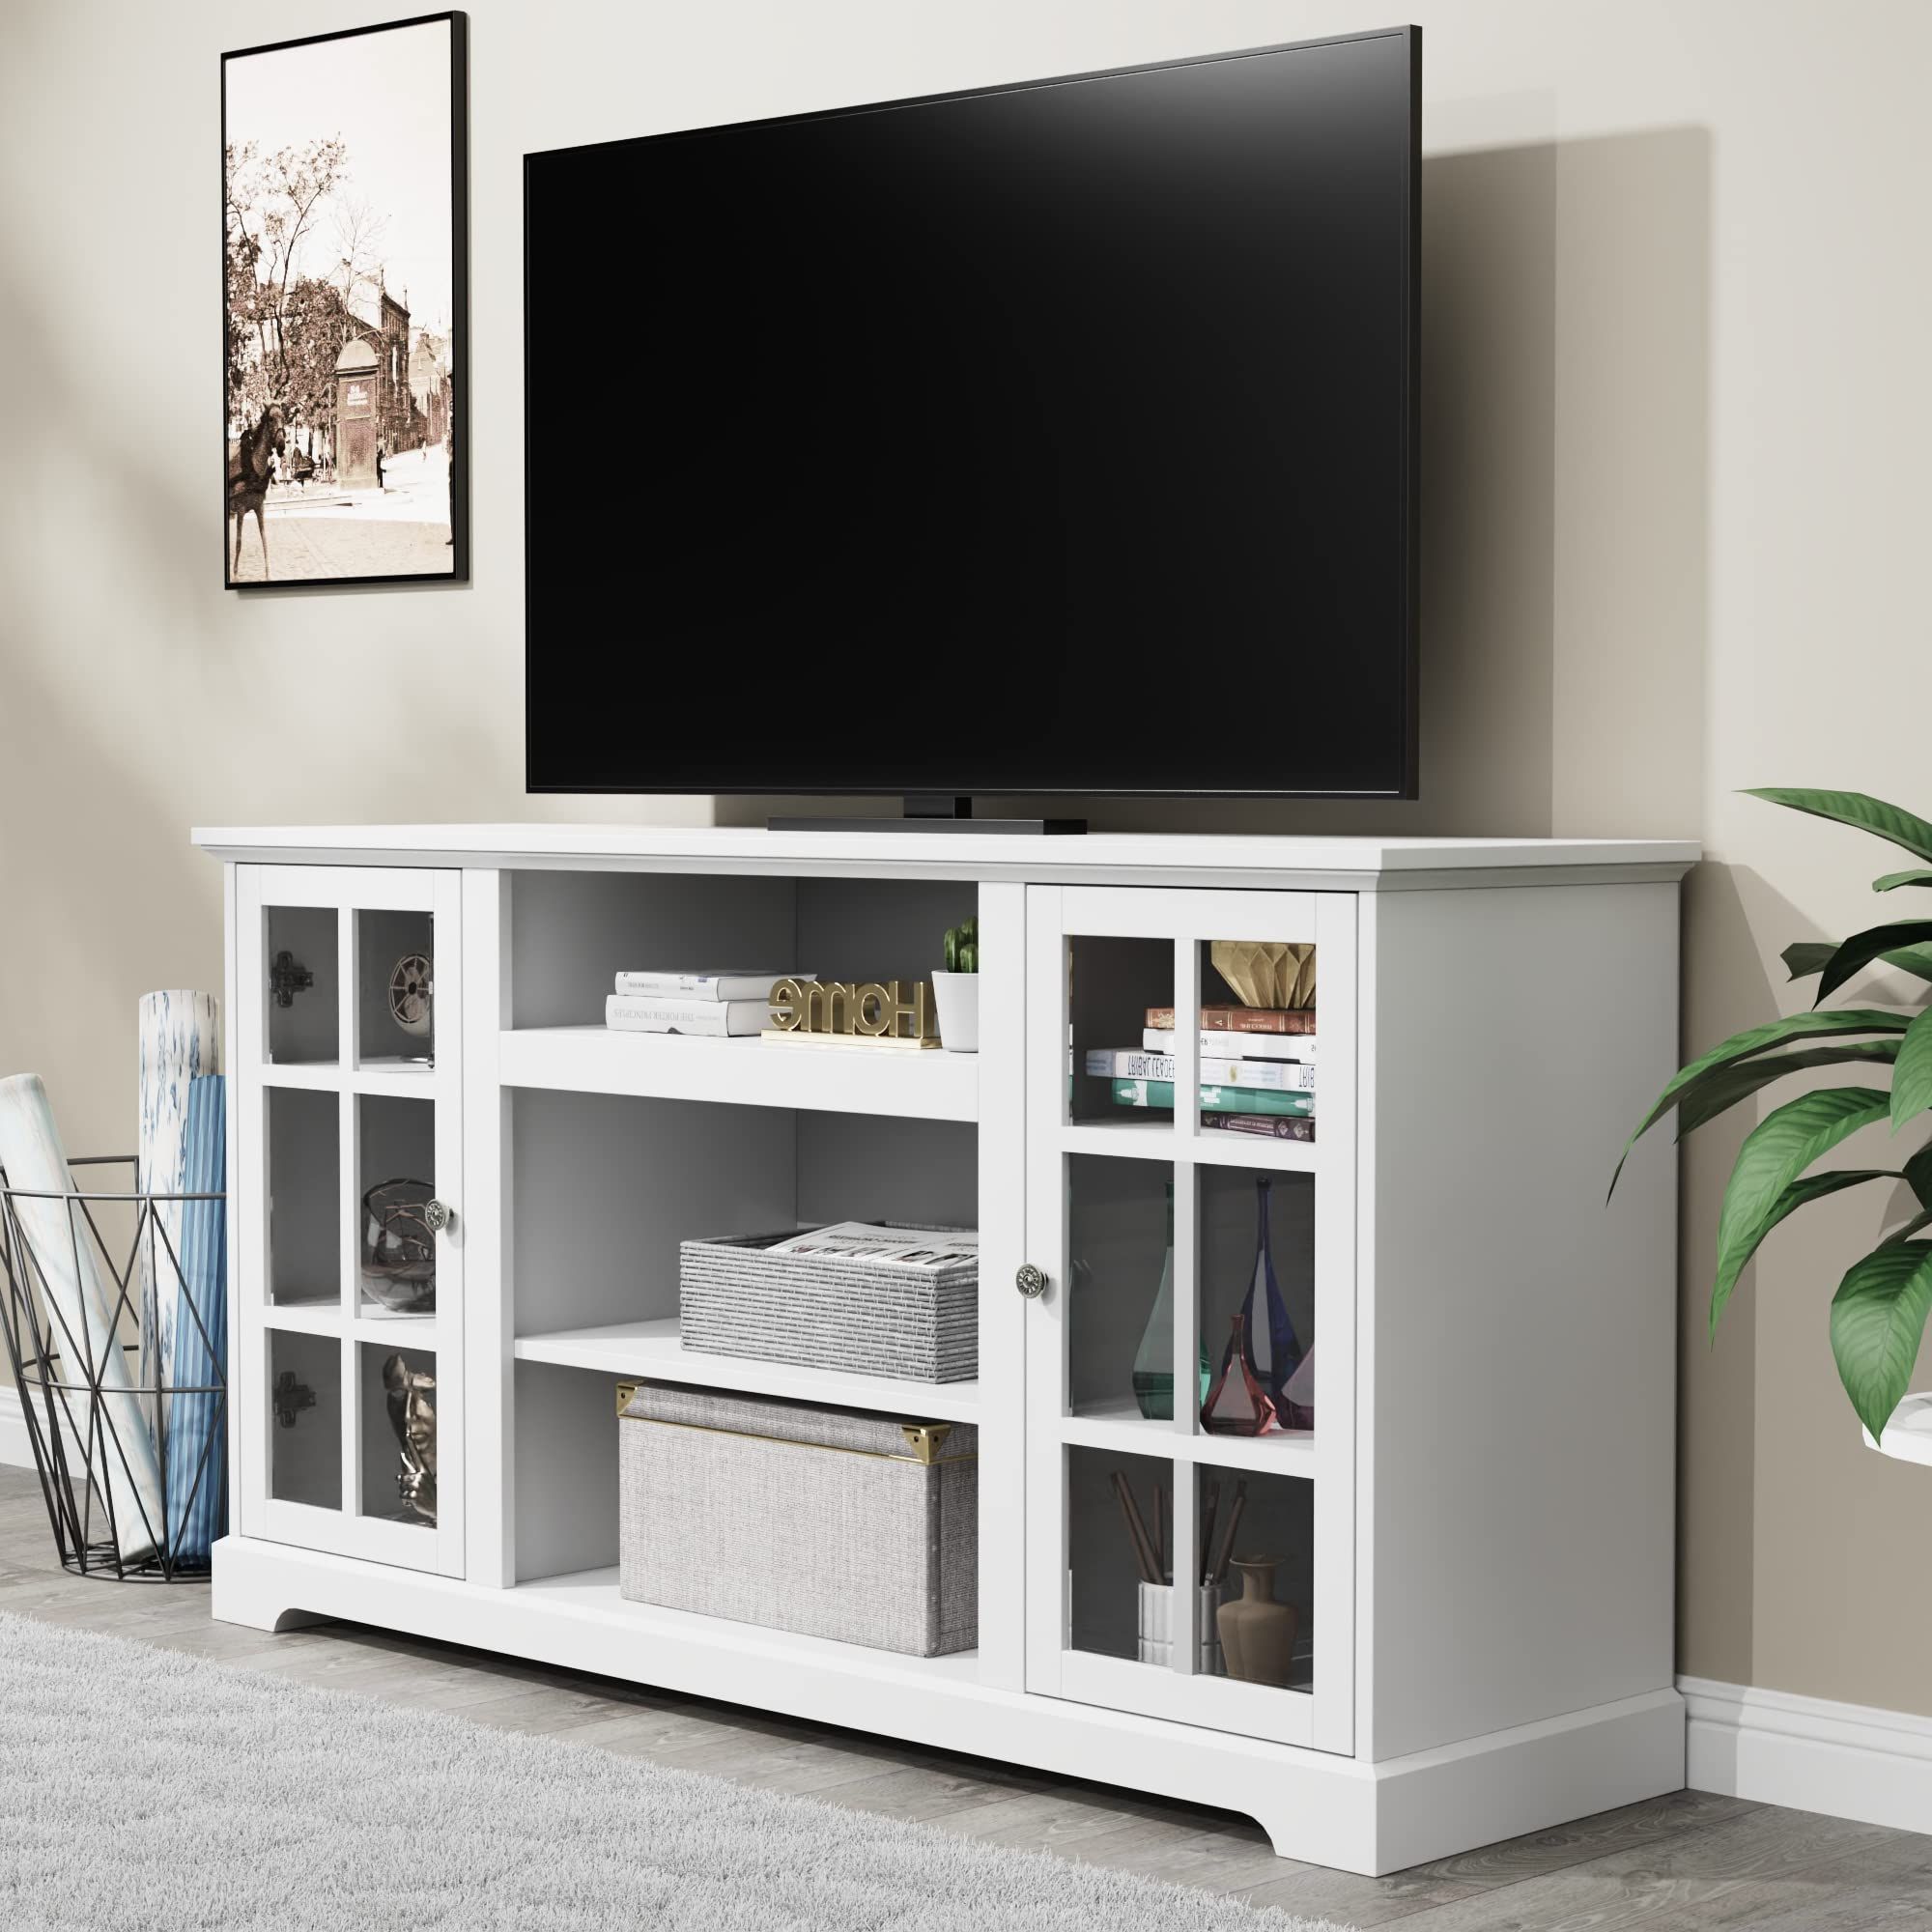 Fashionable Amazon: Lghm White Tv Stand, Entertainment Center For 65 Inch Tv, 58"  Modern Farmhouse Tv Stand With Glass Door, Tall Tv Console Or Storage  Cabinet And Sideboard Buffet : Everything Else With White Storage Tv Stands (View 5 of 10)